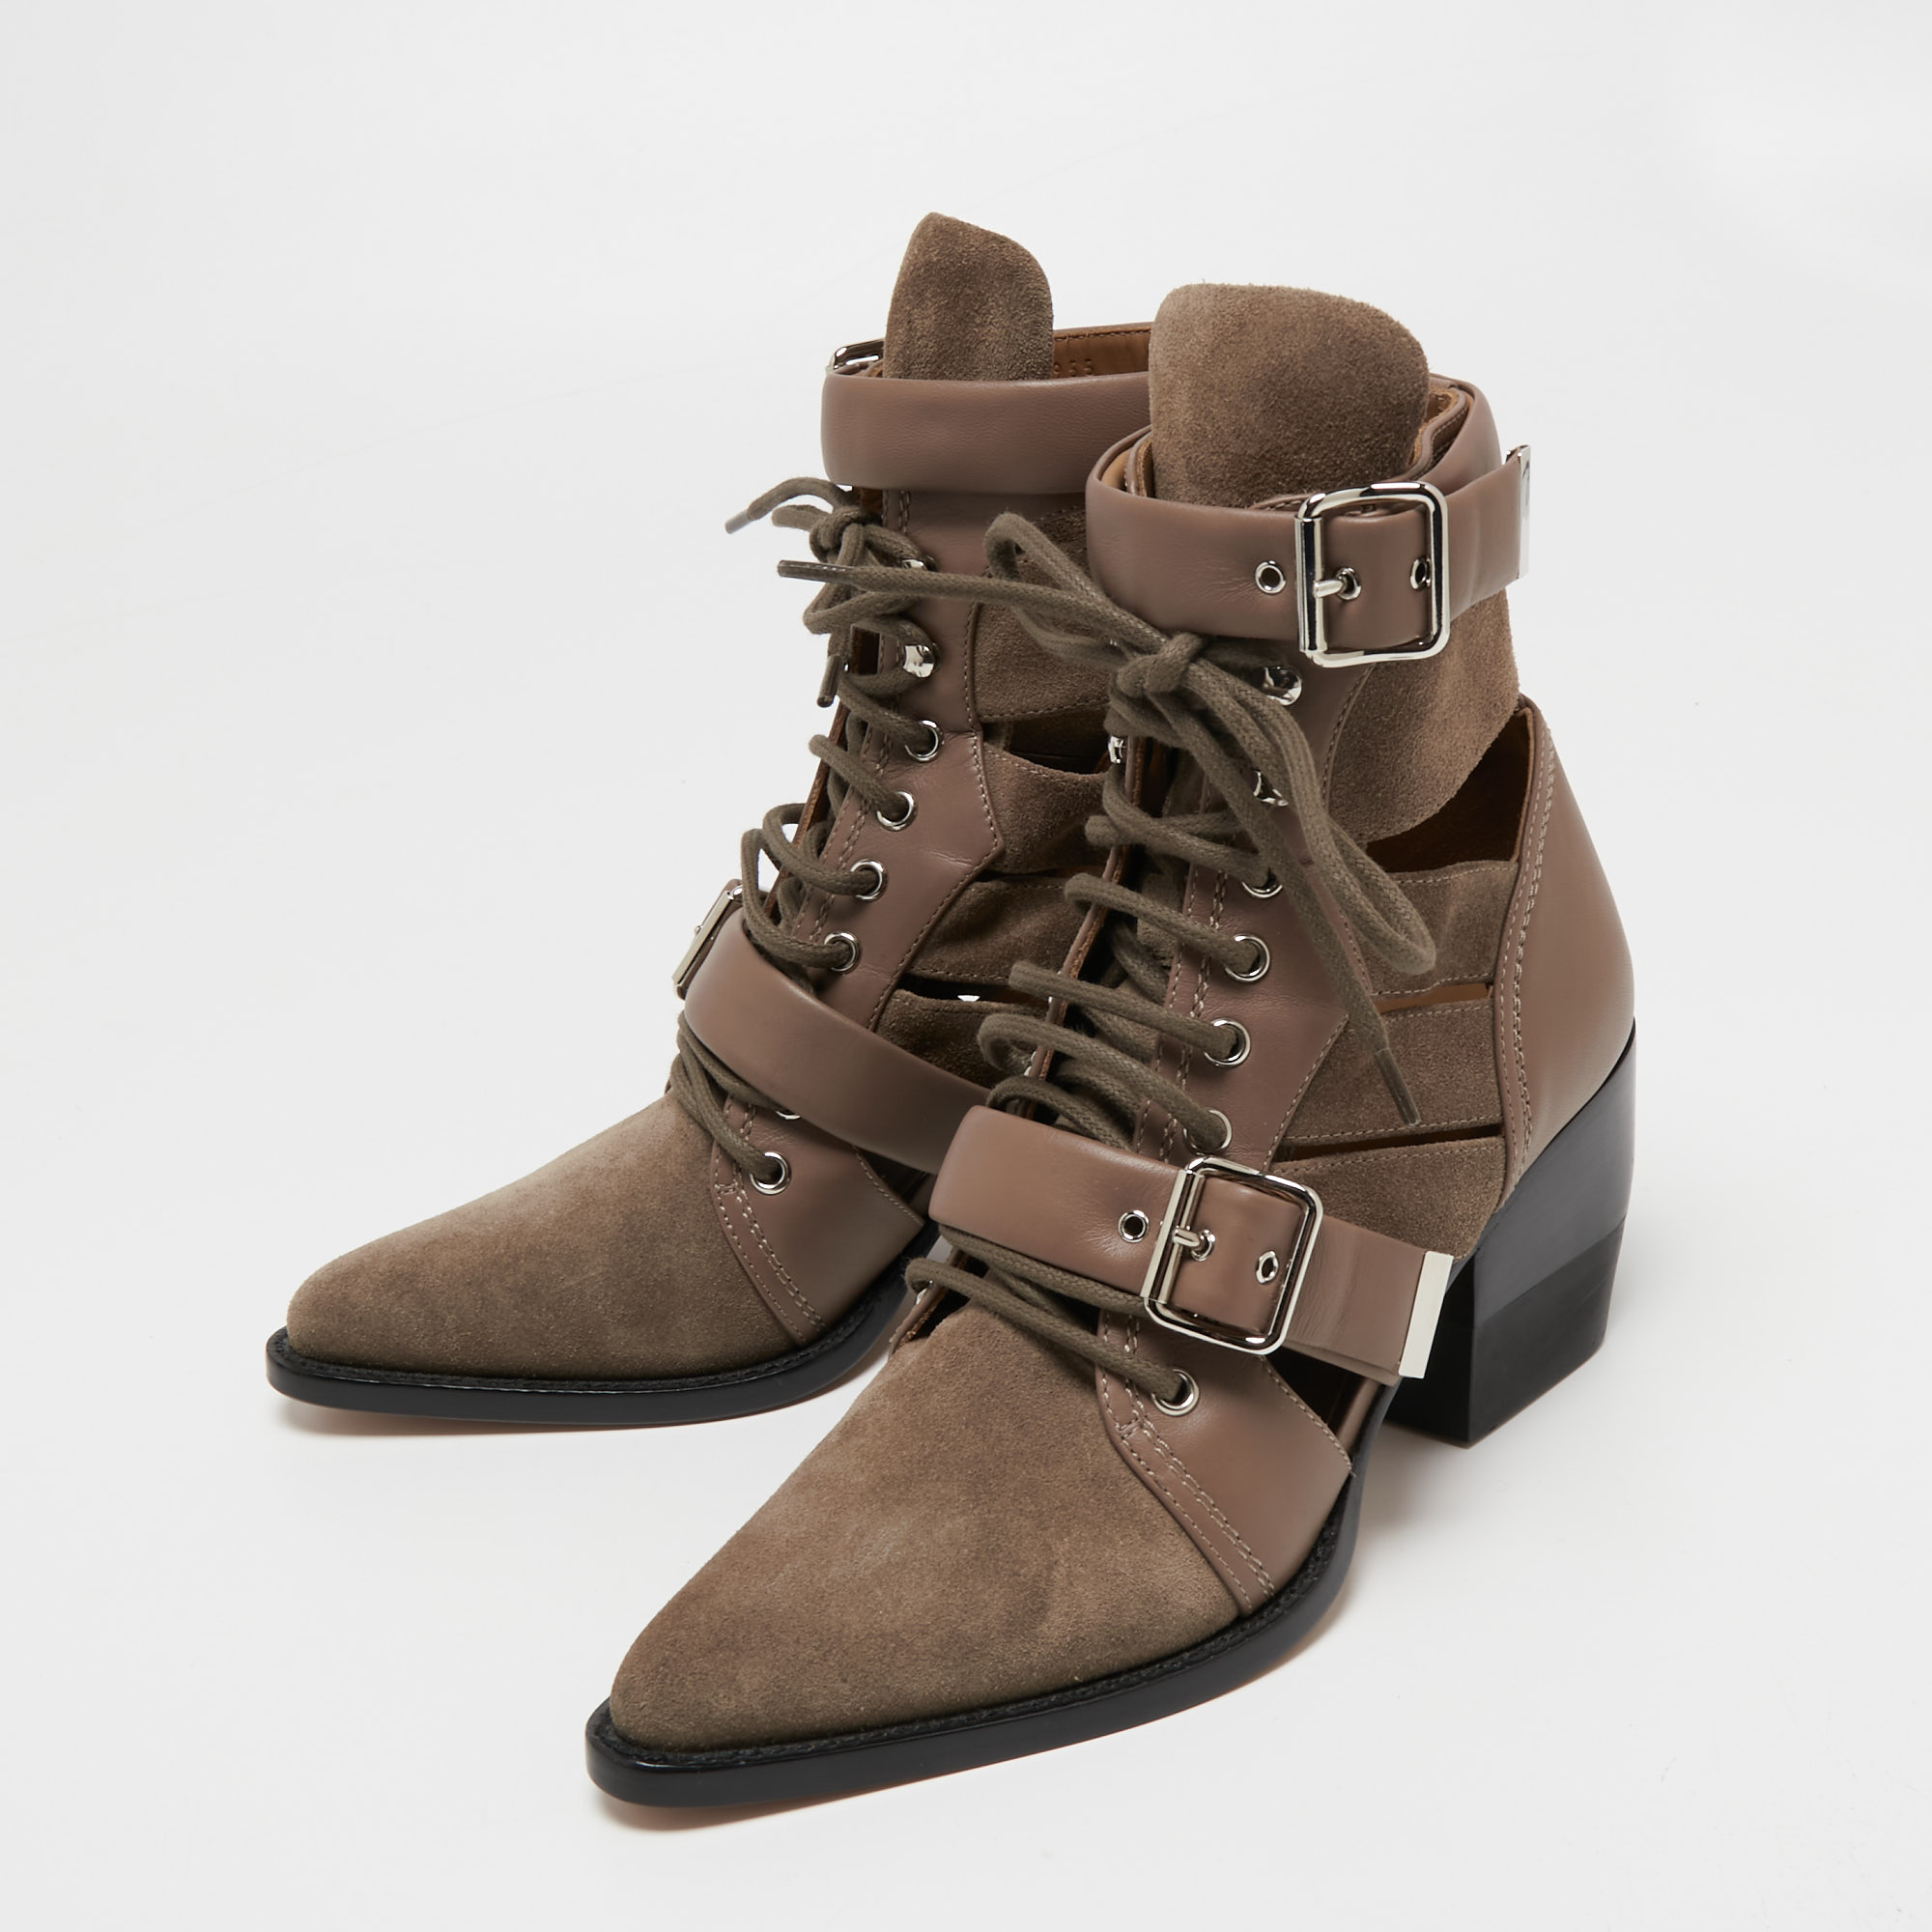 

Chloé Rylee Brown Suede And Leather Buckled Ankle Boots Size